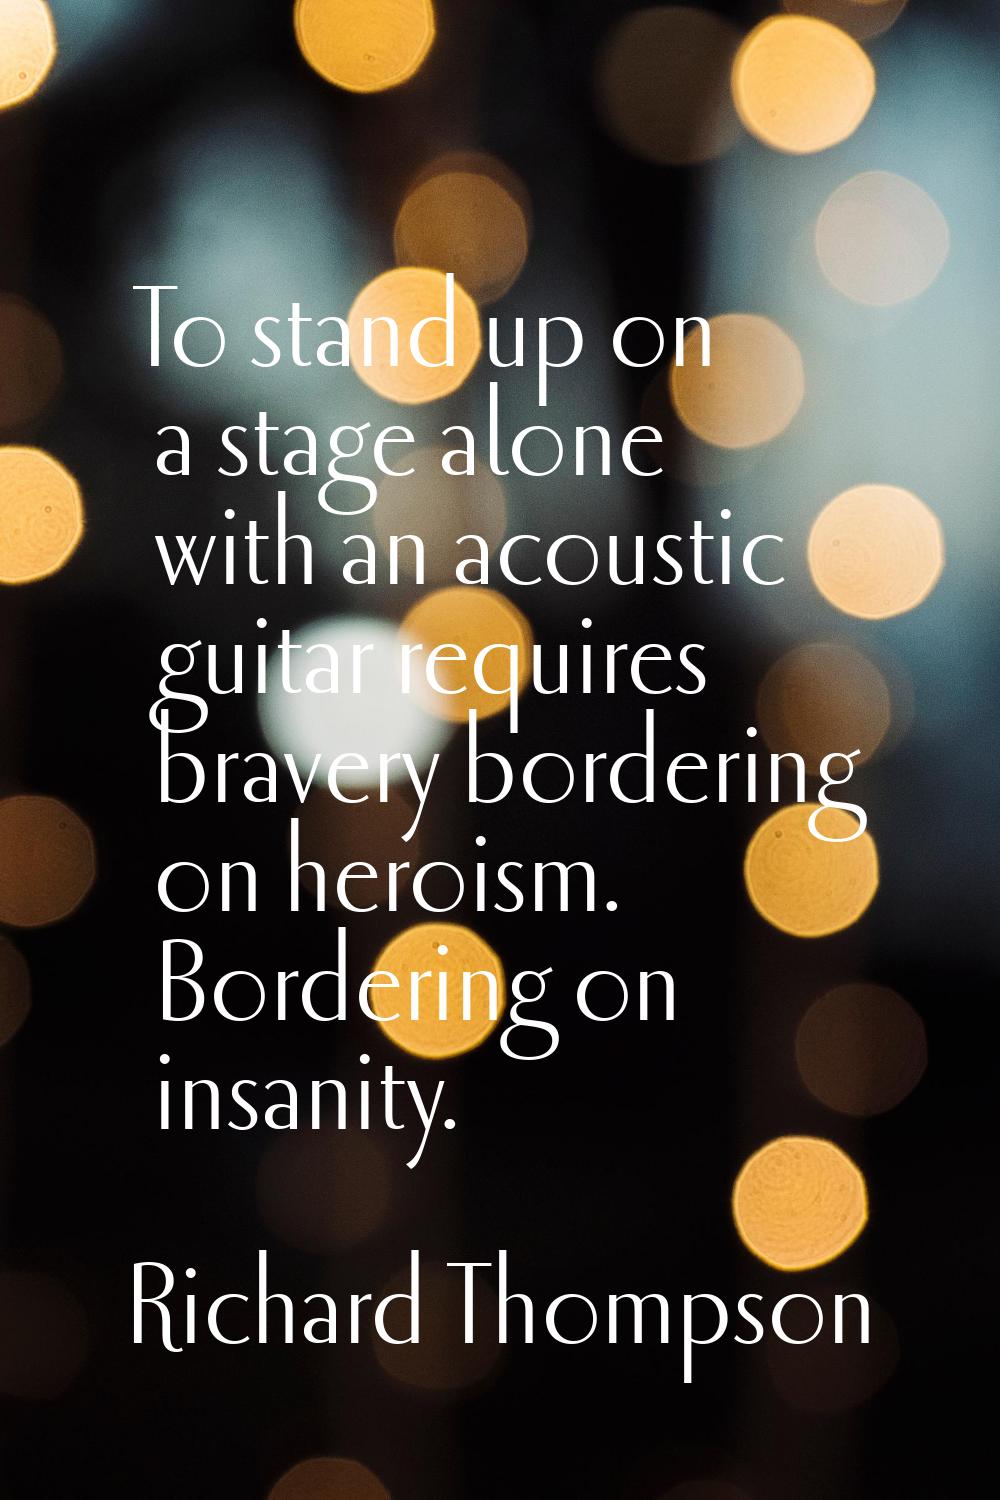 To stand up on a stage alone with an acoustic guitar requires bravery bordering on heroism. Borderi